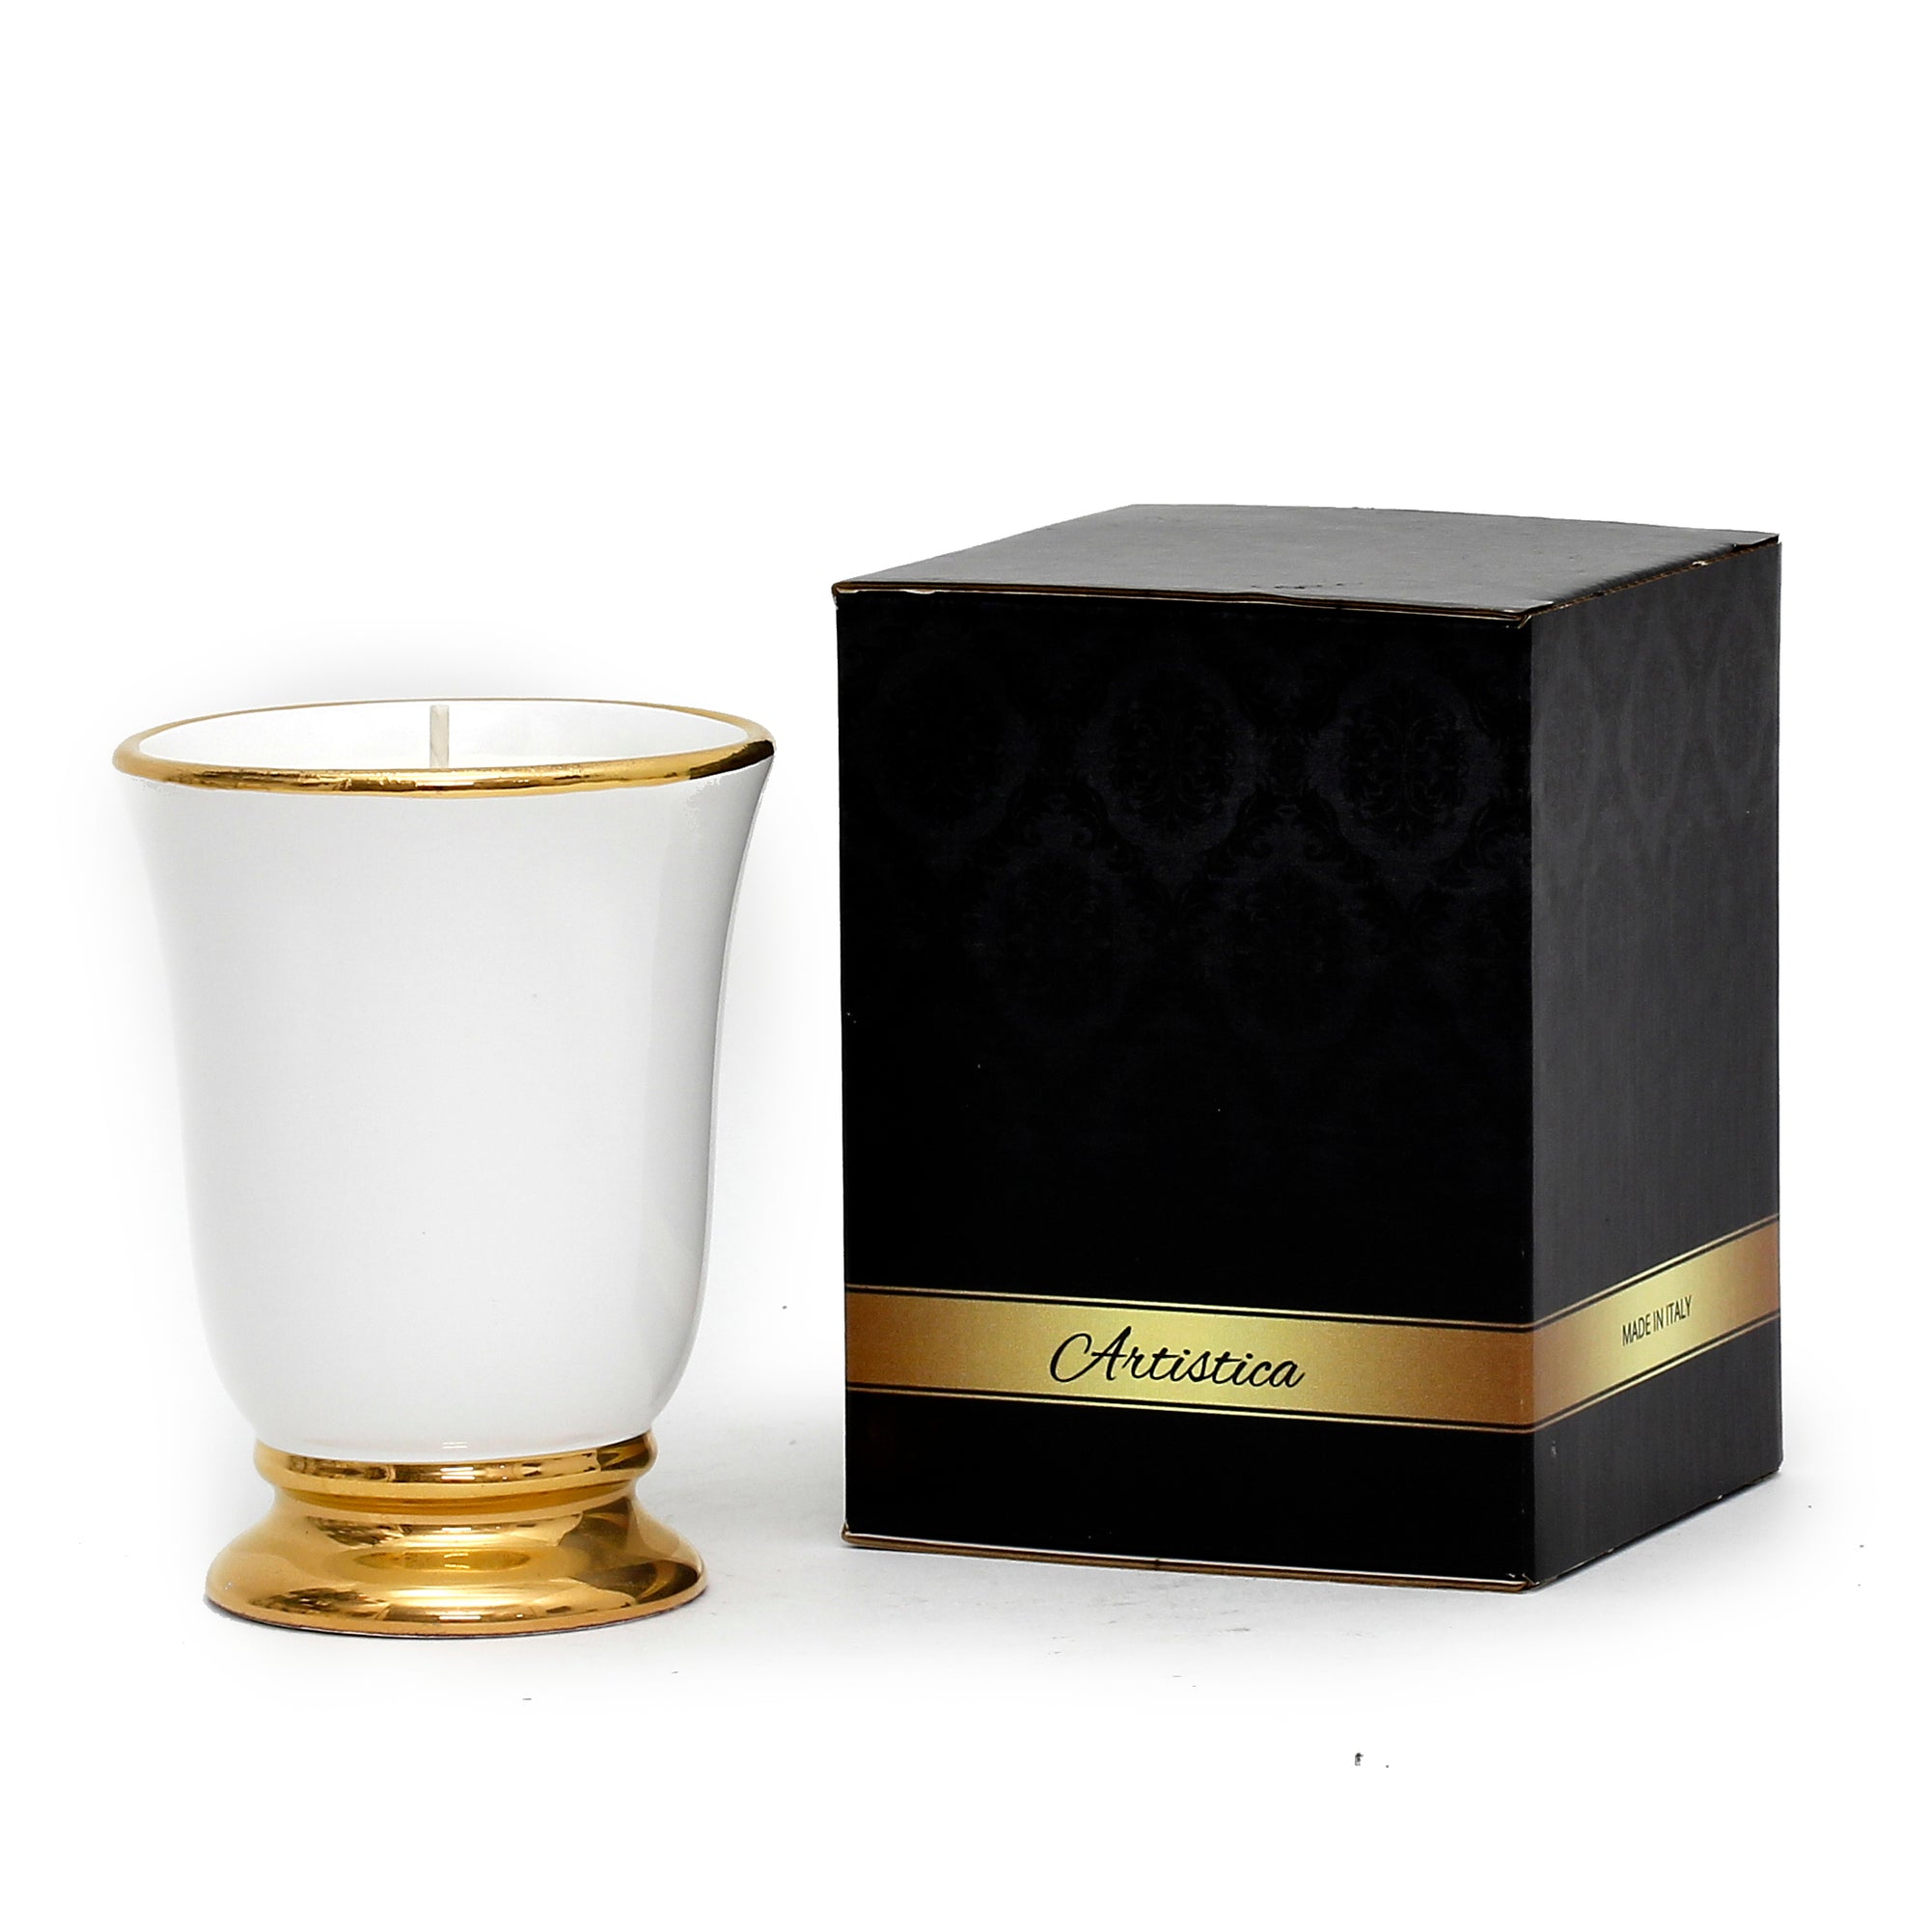 HOLIDAYS DERUTA ORO: Deluxe Precious Bell Cup Candle with Pure Gold Rim - Artistica.com